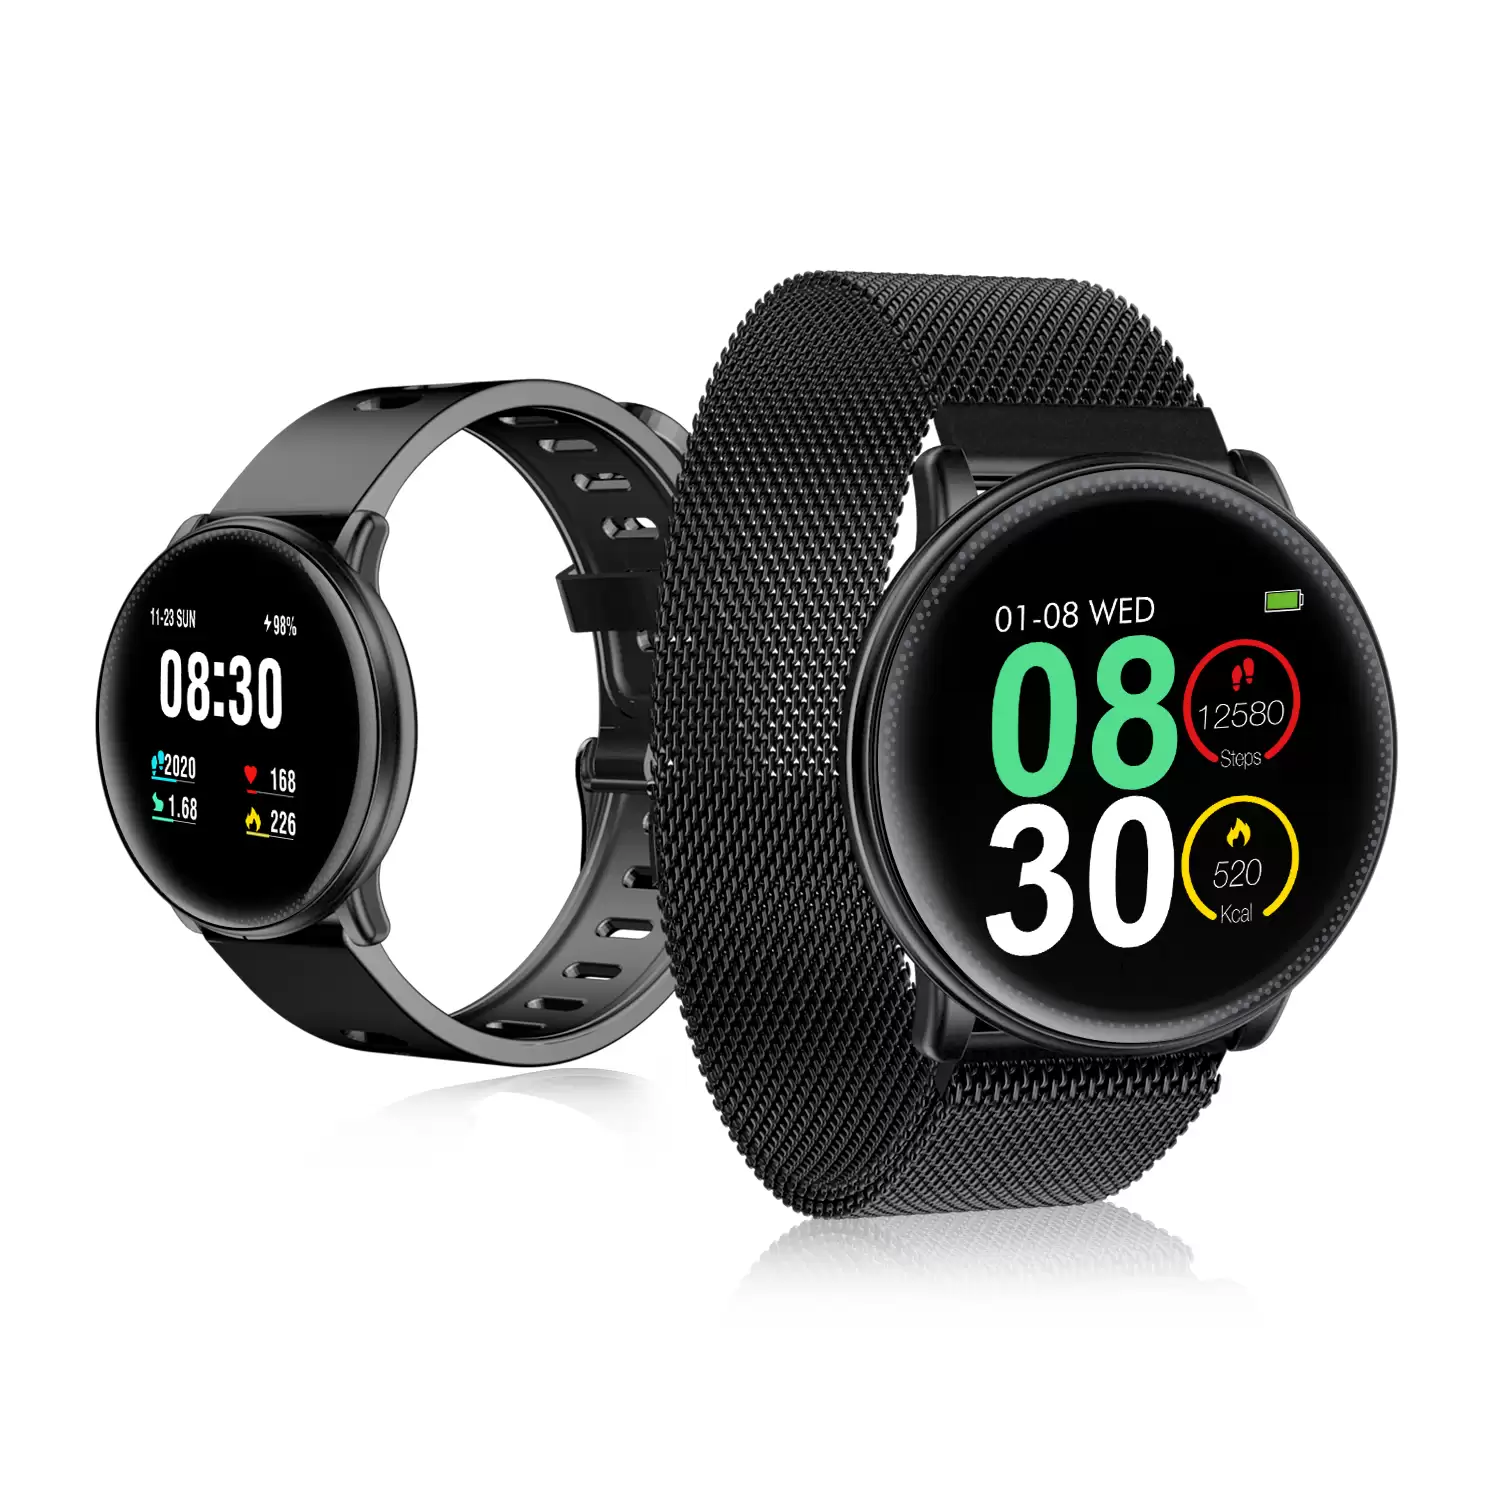 Order In Just $22.99 / €6.24 [free Gift] Umidigi Uwatch2 Full Touch Screen Entire Steel Body 24h Heart Rate Sports Mode Message Smart Watch With This Coupon At Banggood